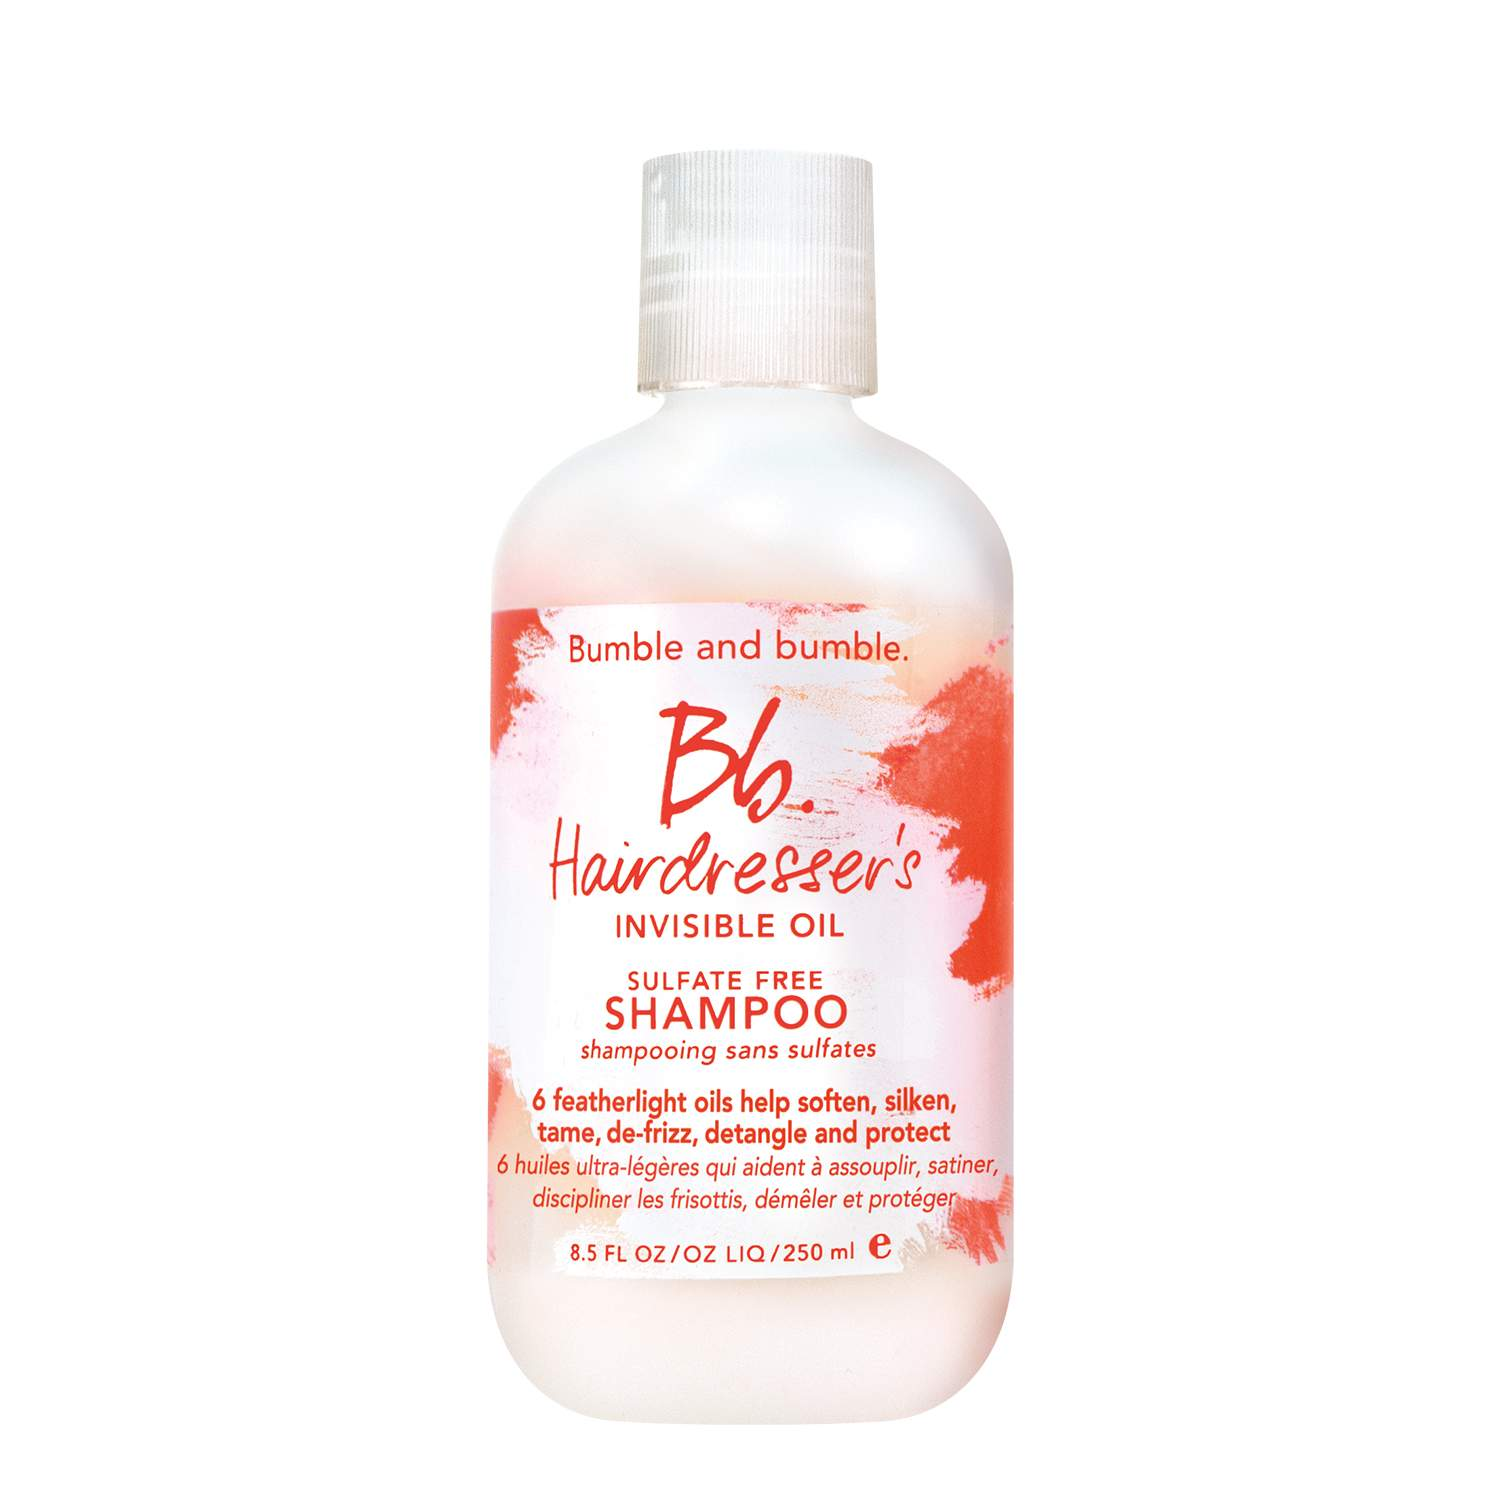 Bumble and bumble. Hairdresser's Invisible Oil Shampoo (250ml)